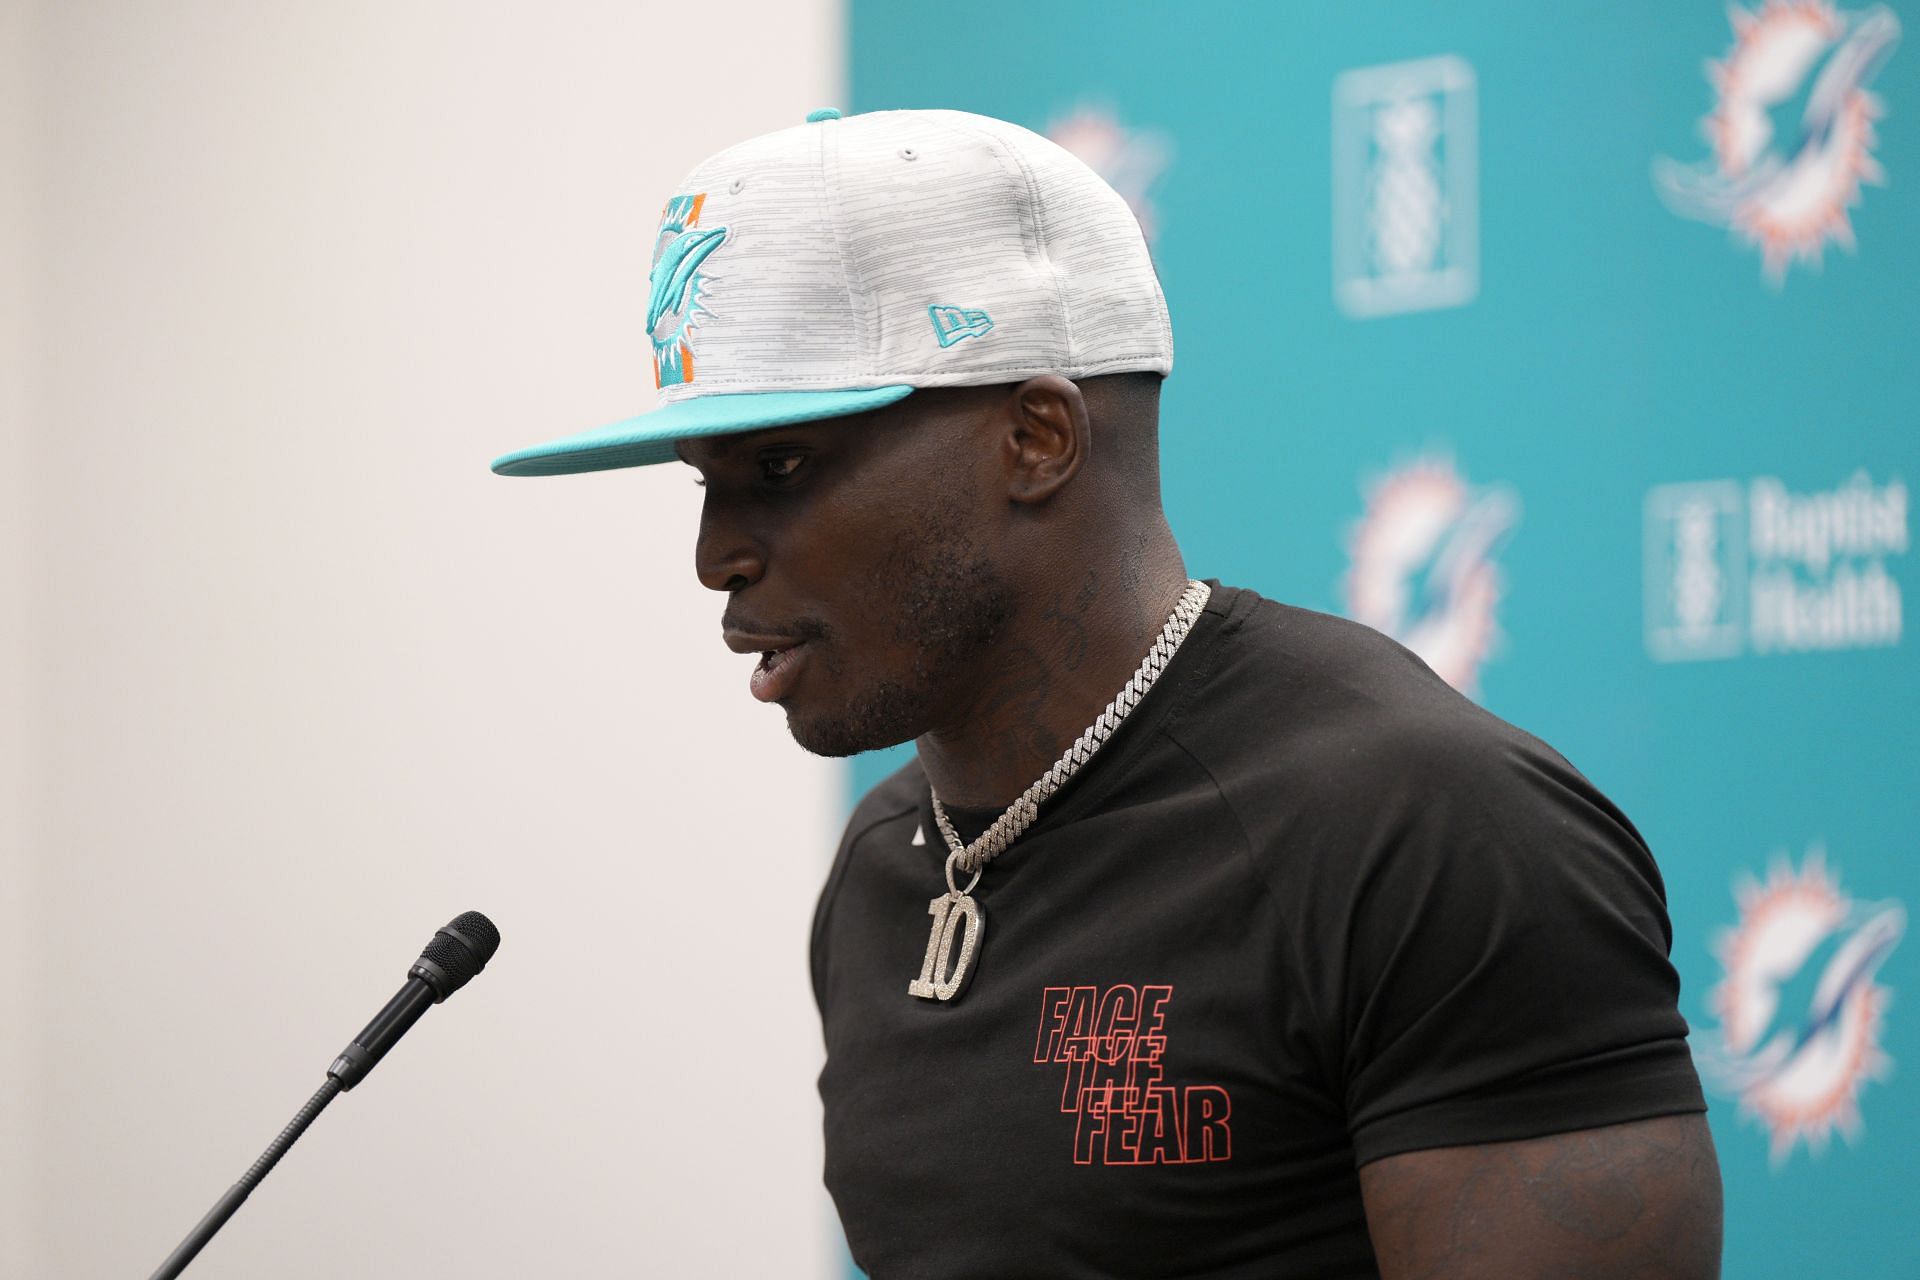 Damar Hamlin playing against Tyreek Hill and Jaylen Waddle in Week 4 leaves  NFL chuckling - “Dolphins dropping 80 on him”